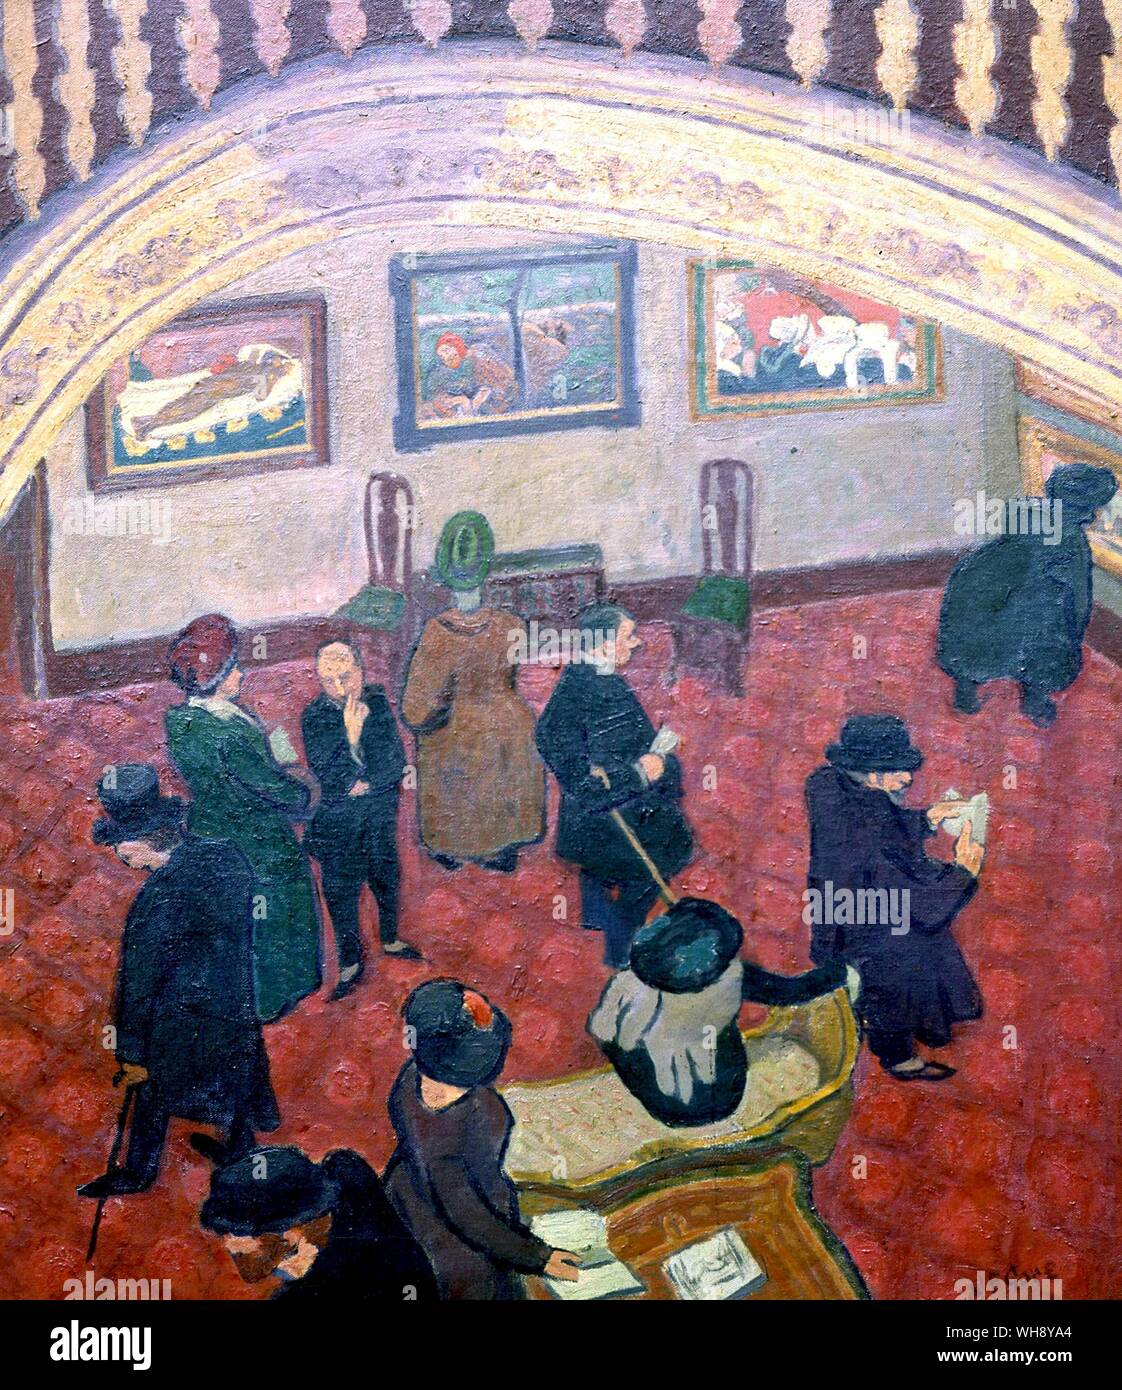 Gauguins and Connoisseurs at the Stafford Gallery London 1911 by Spencer Gore. The visitors include Walter Richard Sickert Augustus John, John Neville of the Stafford Gallery and Philip Wilson Steer Stock Photo